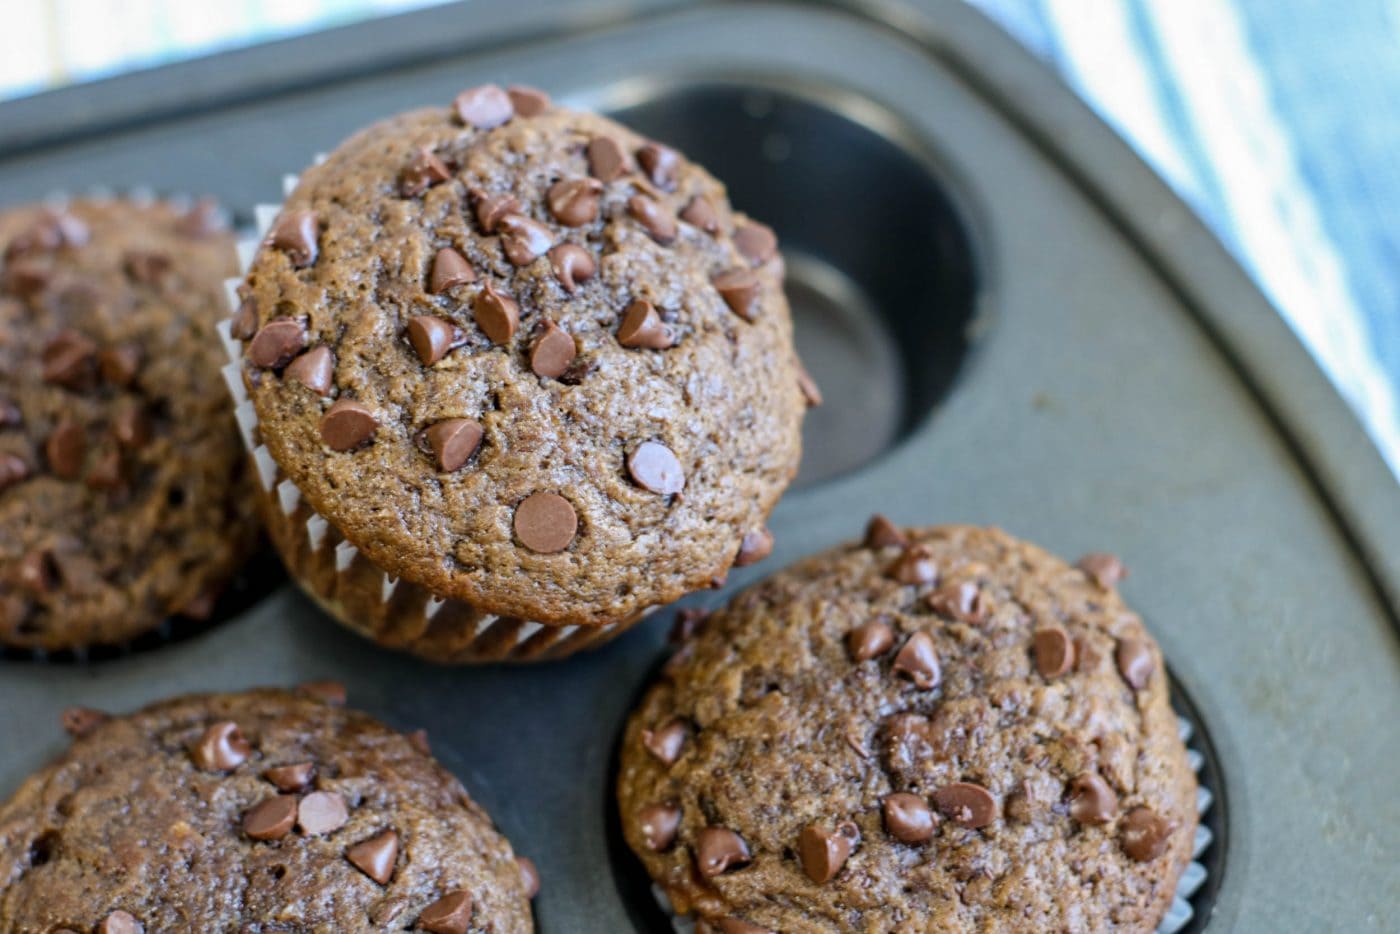 Chocolate Chip Banana Muffins in a muffin pan.